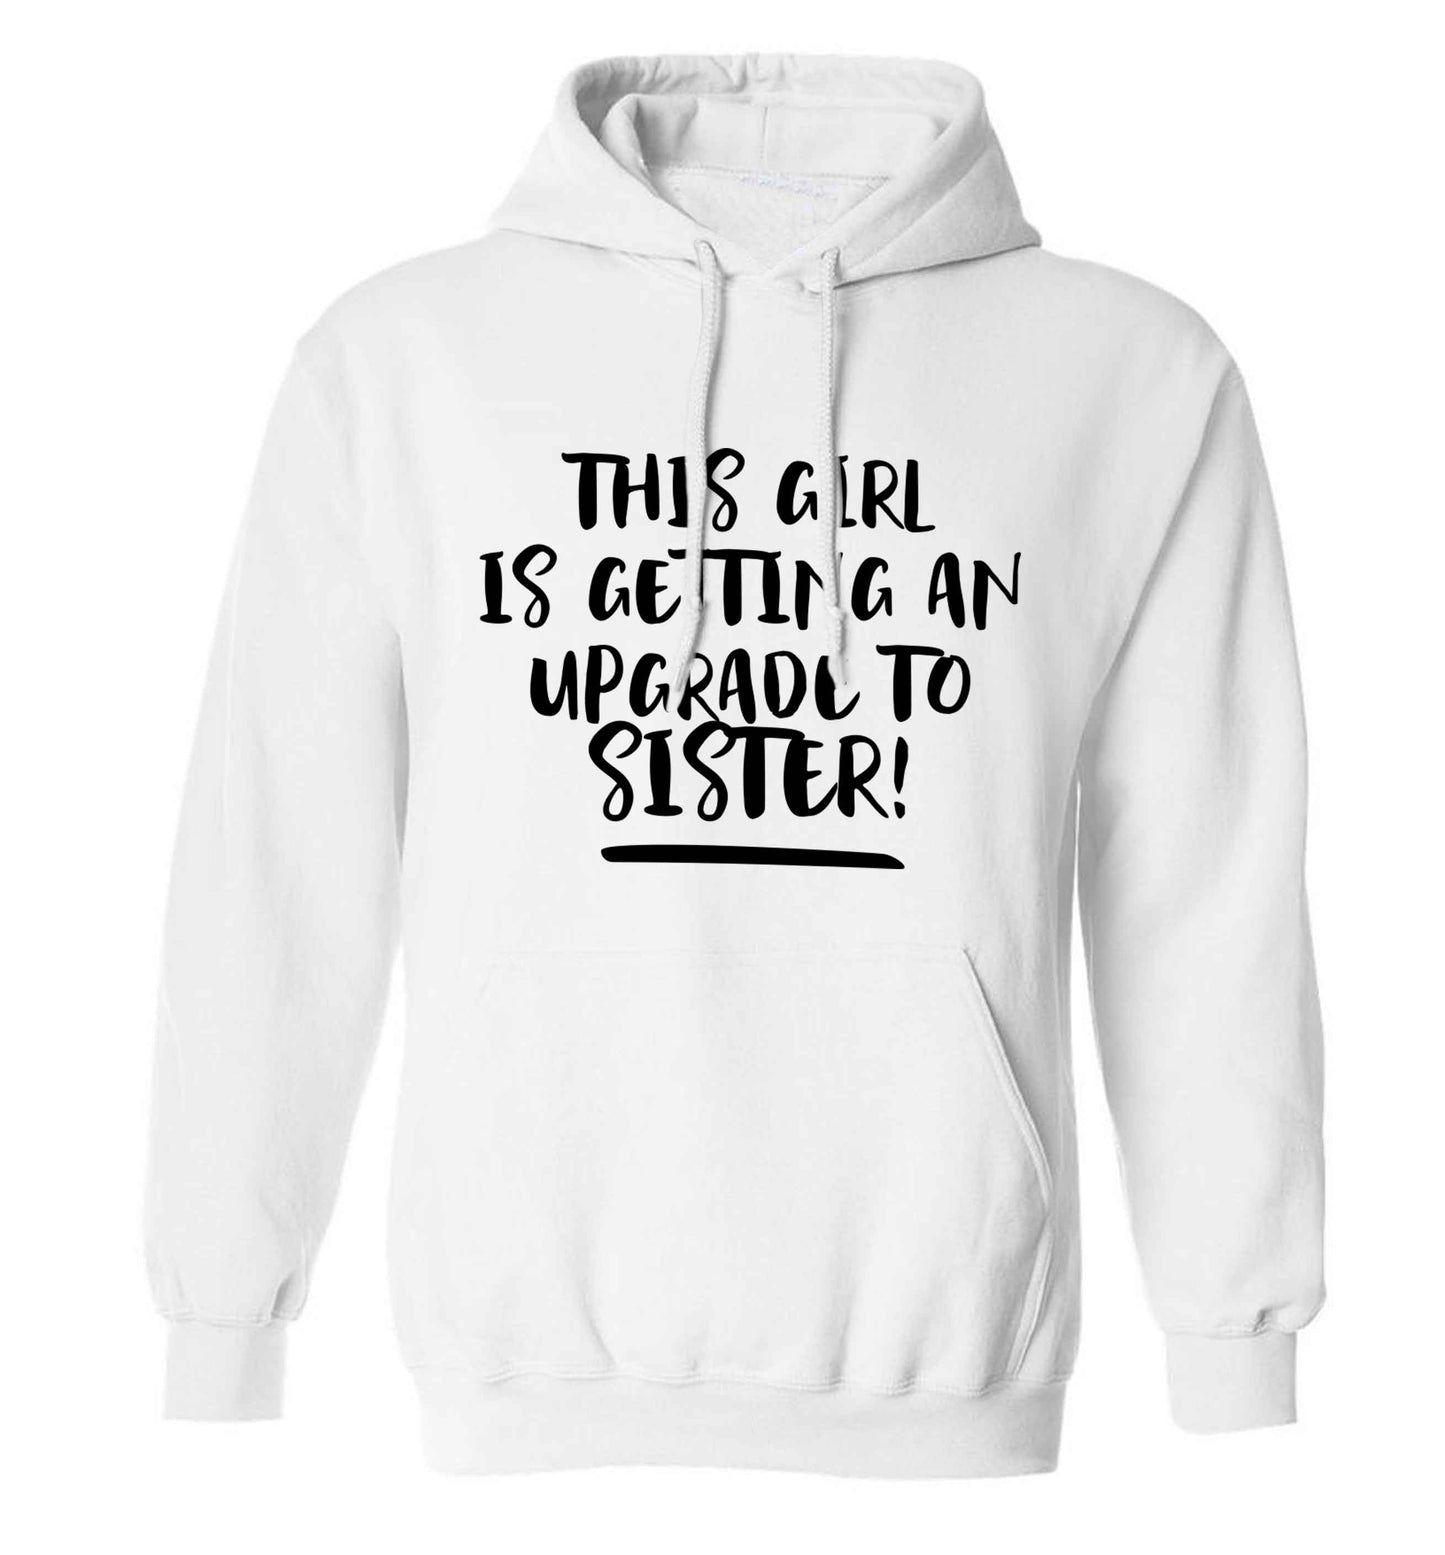 This girl is getting an upgrade to sister! adults unisex white hoodie 2XL